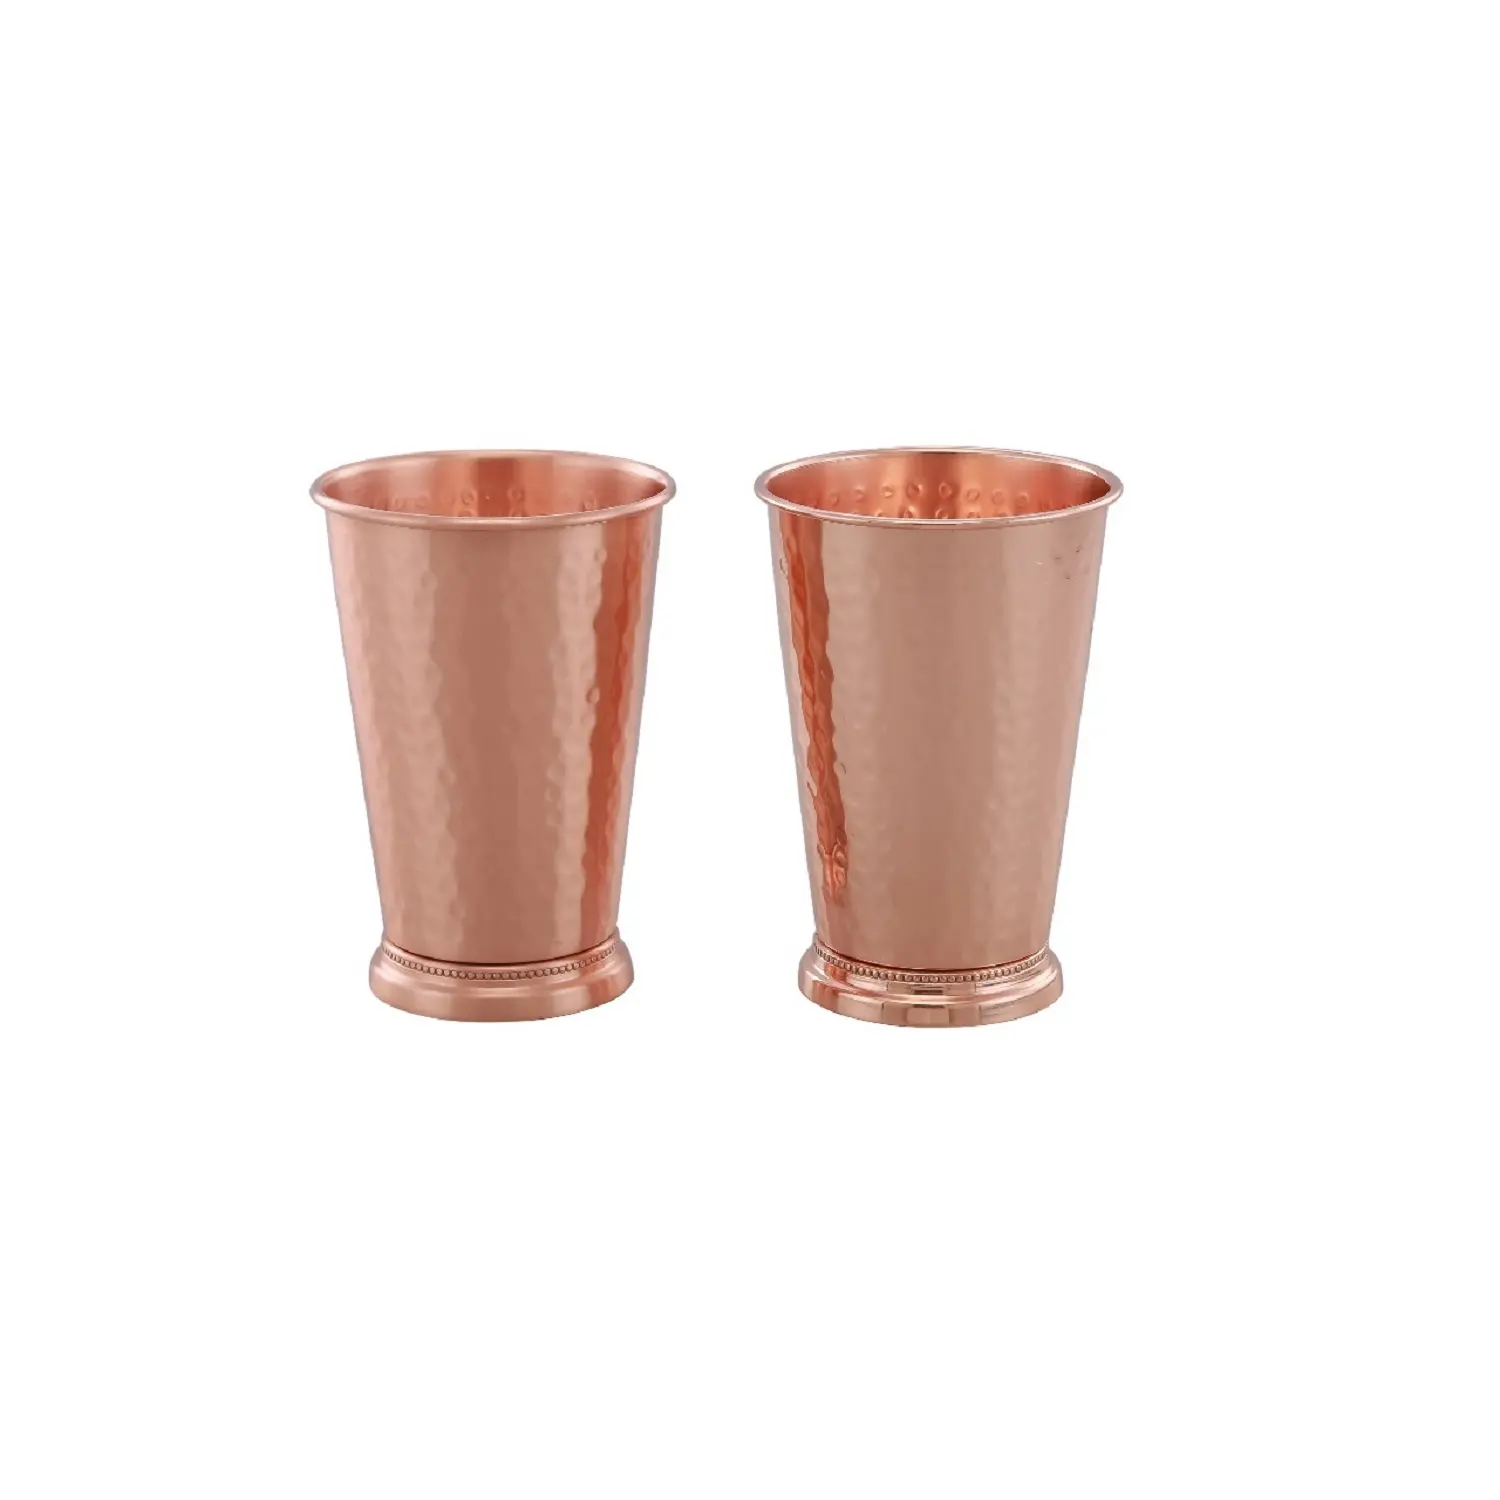 100% Copper Beaded Single Wall Mint Julep Cup, 12 oz Copper Cocktail Beer drinking glass